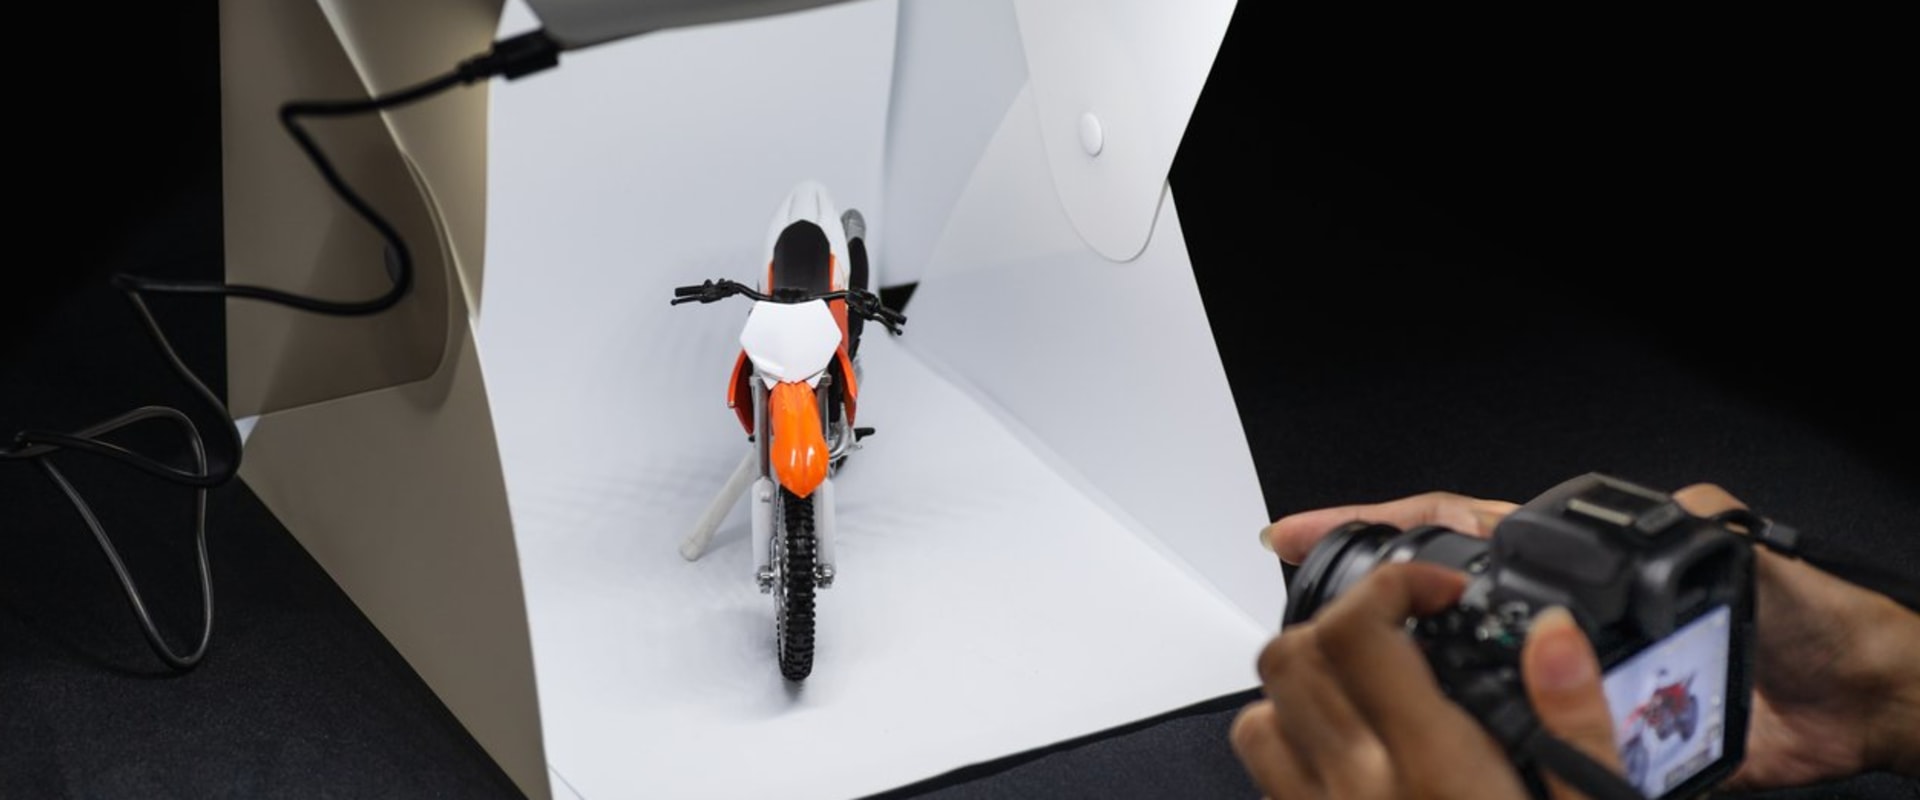 How to Prepare for a Product Photography Session Like a Pro